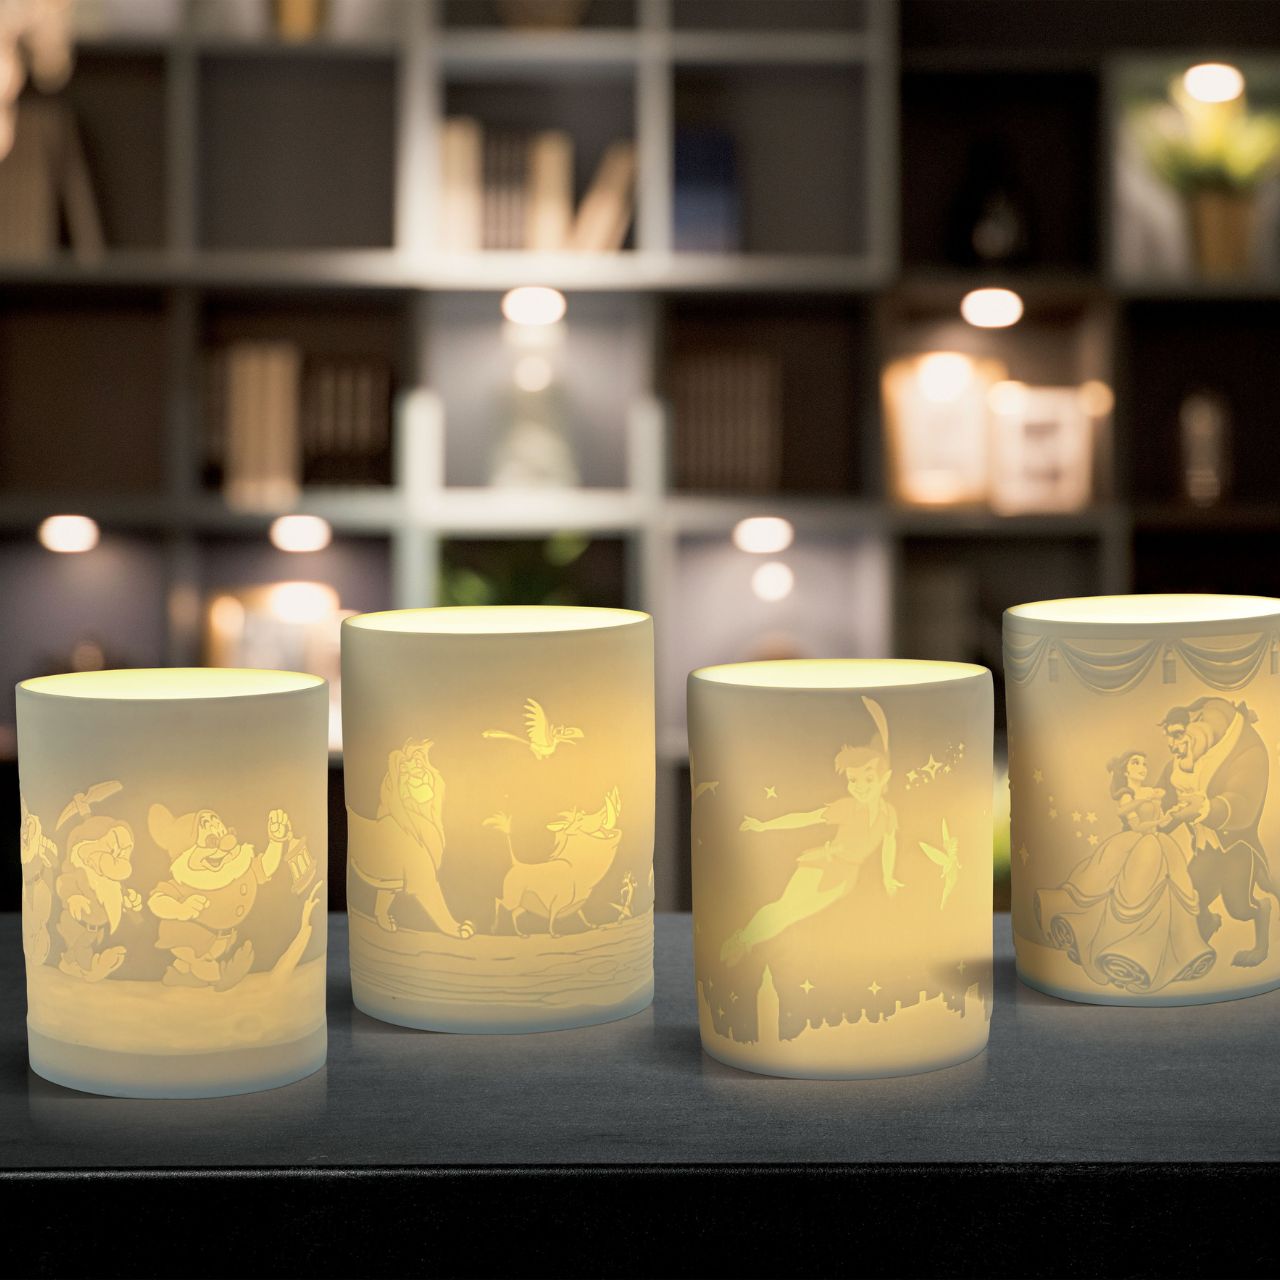 Disney Moonlight Philosophy The Lion King Tea Light Holder  Simba, Timon, Pumba and Zazu will seem as if they are growing up right before your eyes when you light the LED candle, and as they flicker across your room. The Lion King characters are etched into the thin translucent porcelain which radiates a warm night light.